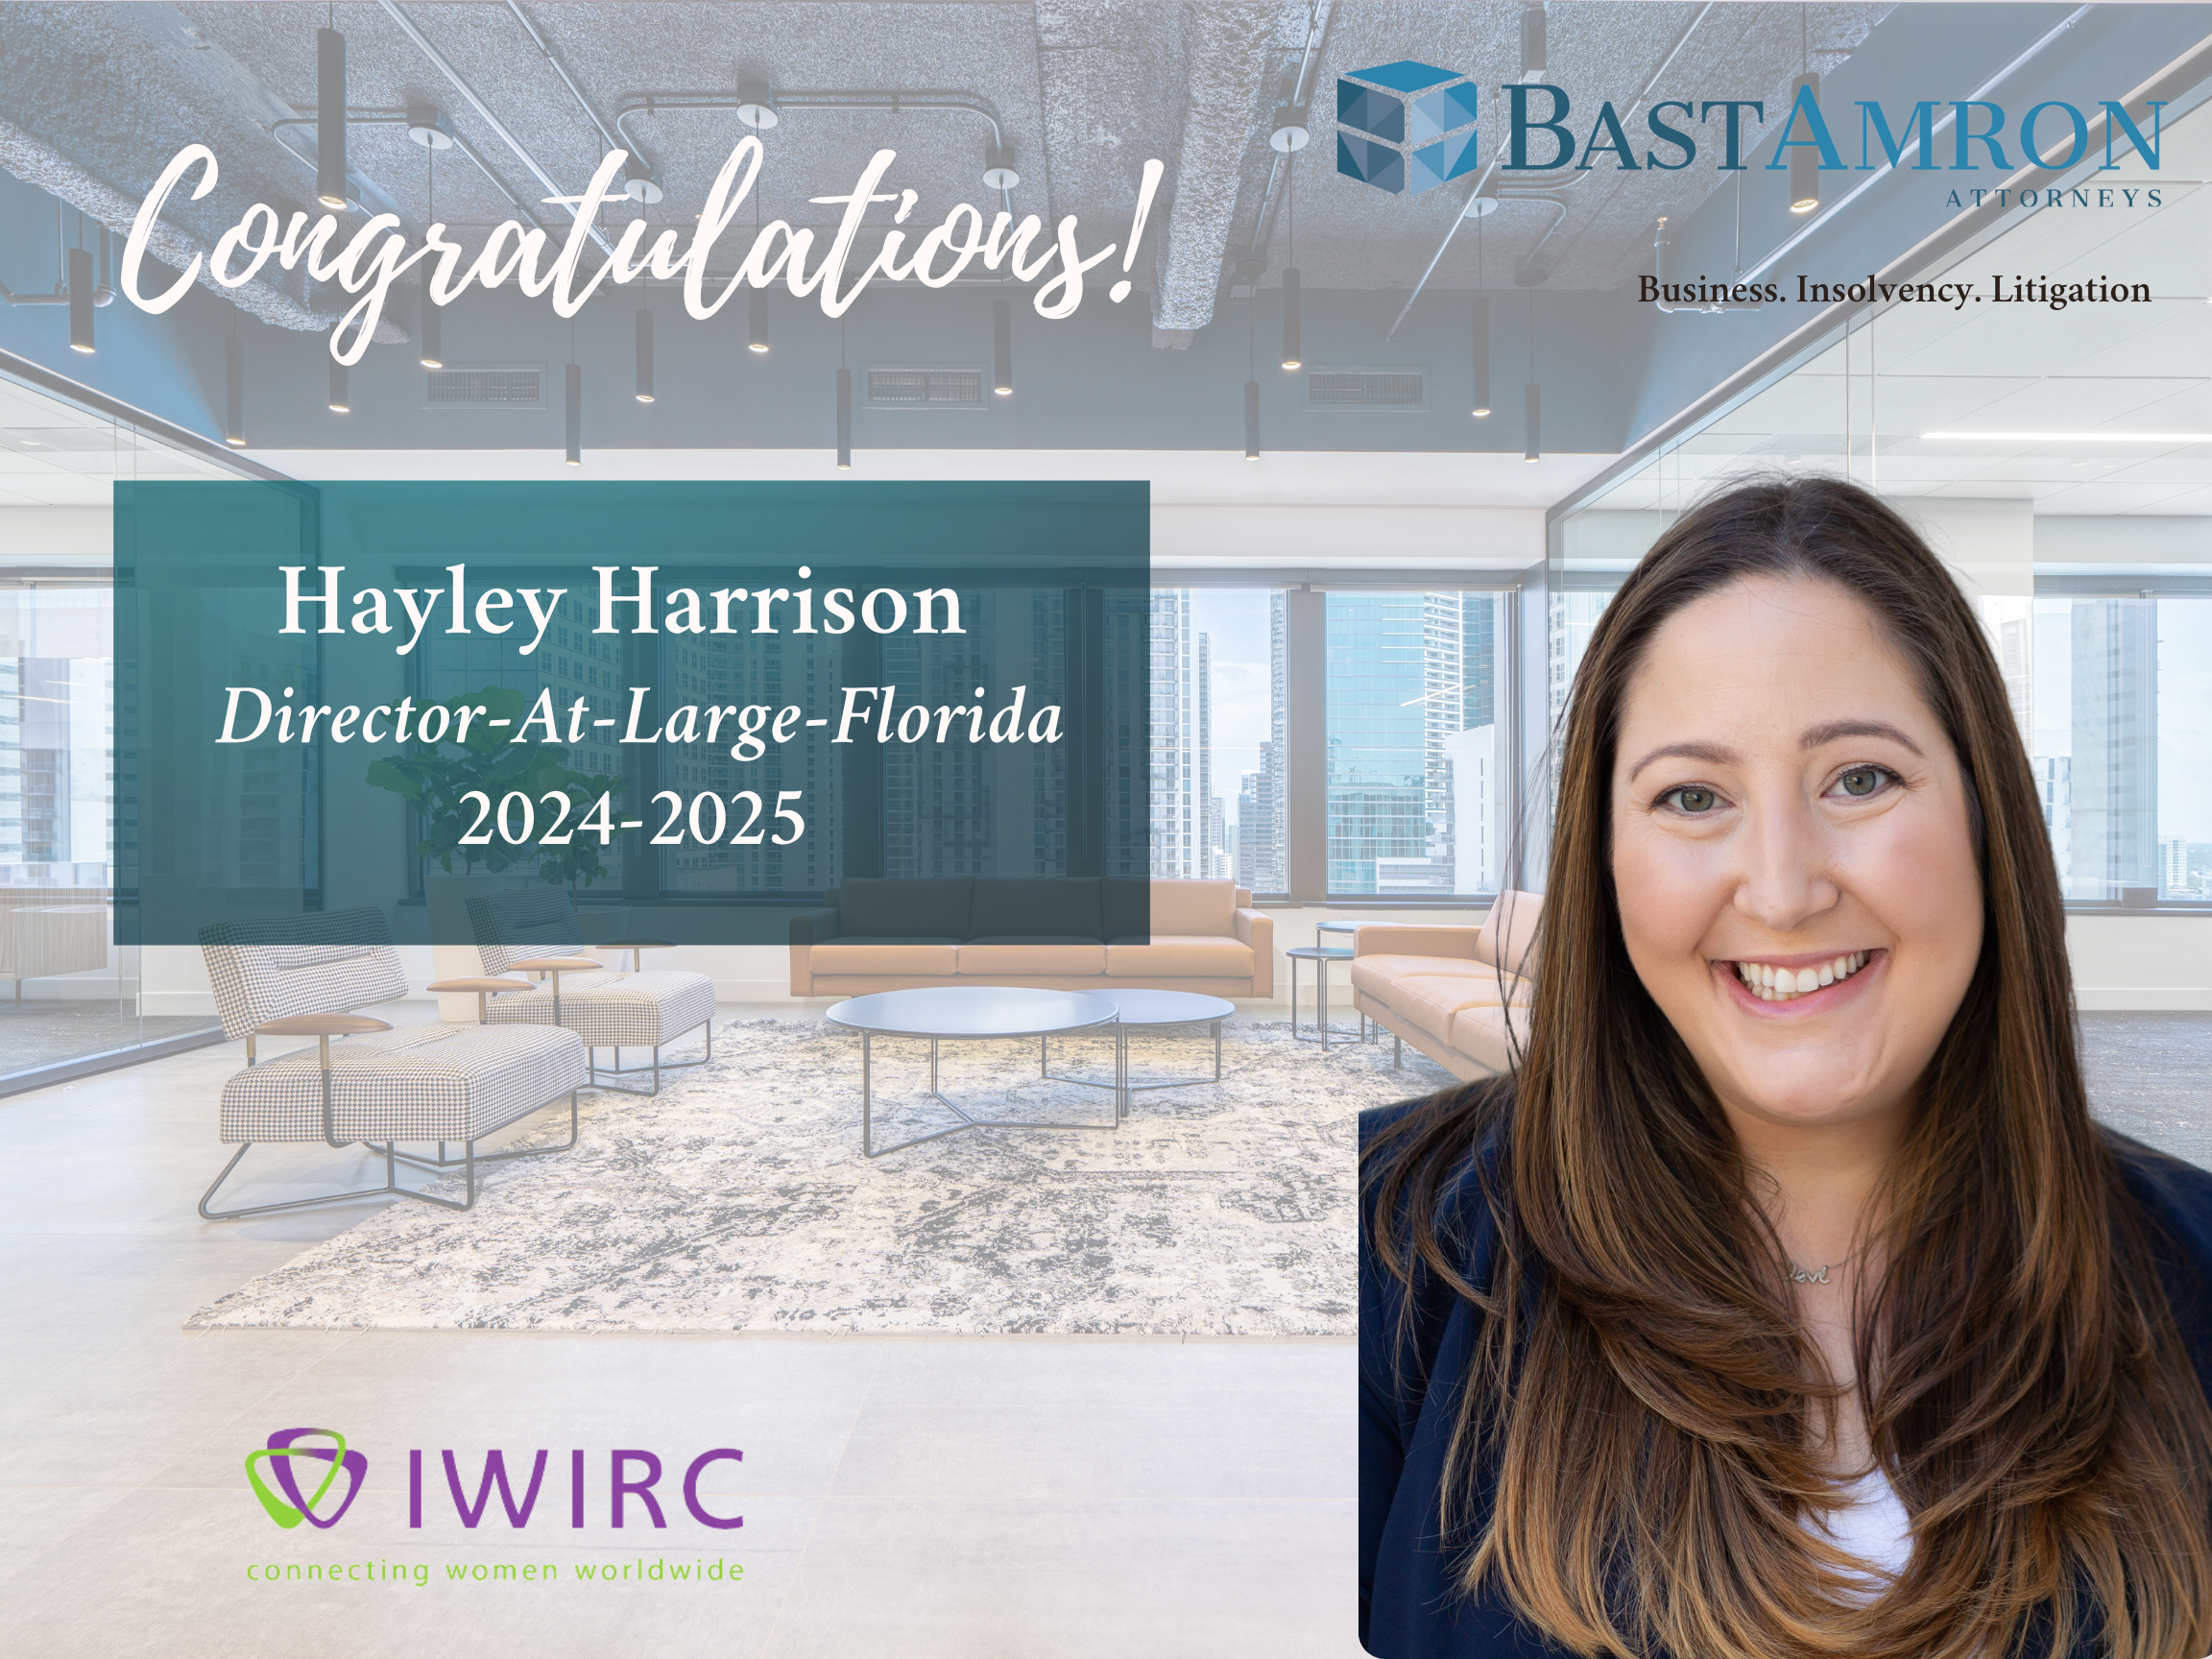 BAST AMRON ATTORNEY HAYLEY HARRISON TO SERVE AS DIRECTOR AT LARGE OF THE INTERNATIONAL WOMEN’S INSOLVENCY & RESTRUCTURING CONFEDERATION FLORIDA